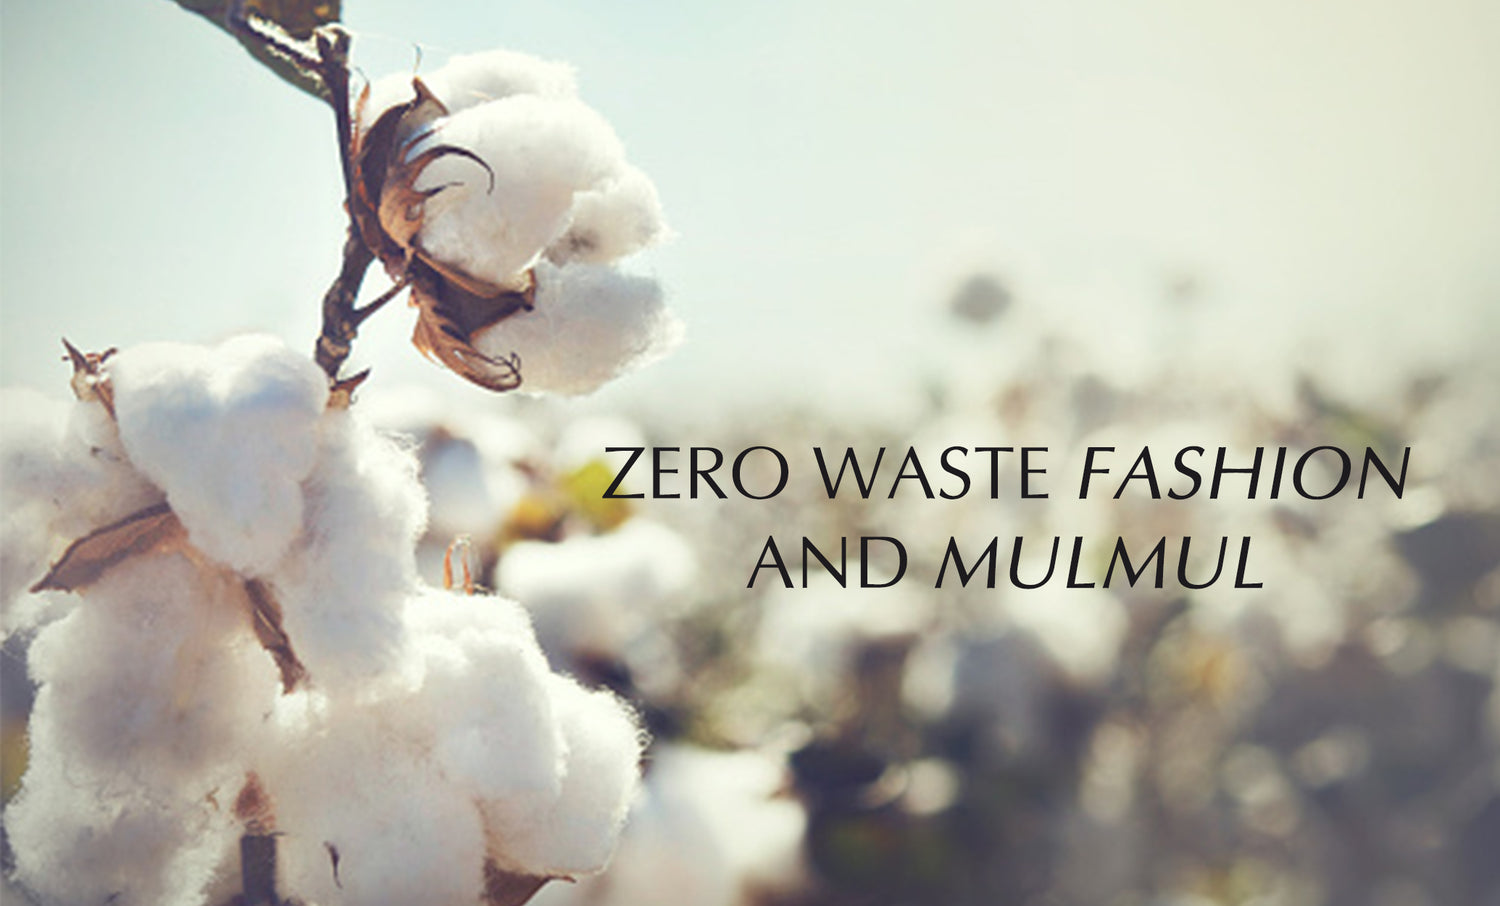 We at Mulmul are known for endorsing Mulmul fabric, a renewable resource that is kind to our mother earth. Mulmul as a conscious fashion brand is committed to Zero waste fashion and other practices for the greater good of our environment.